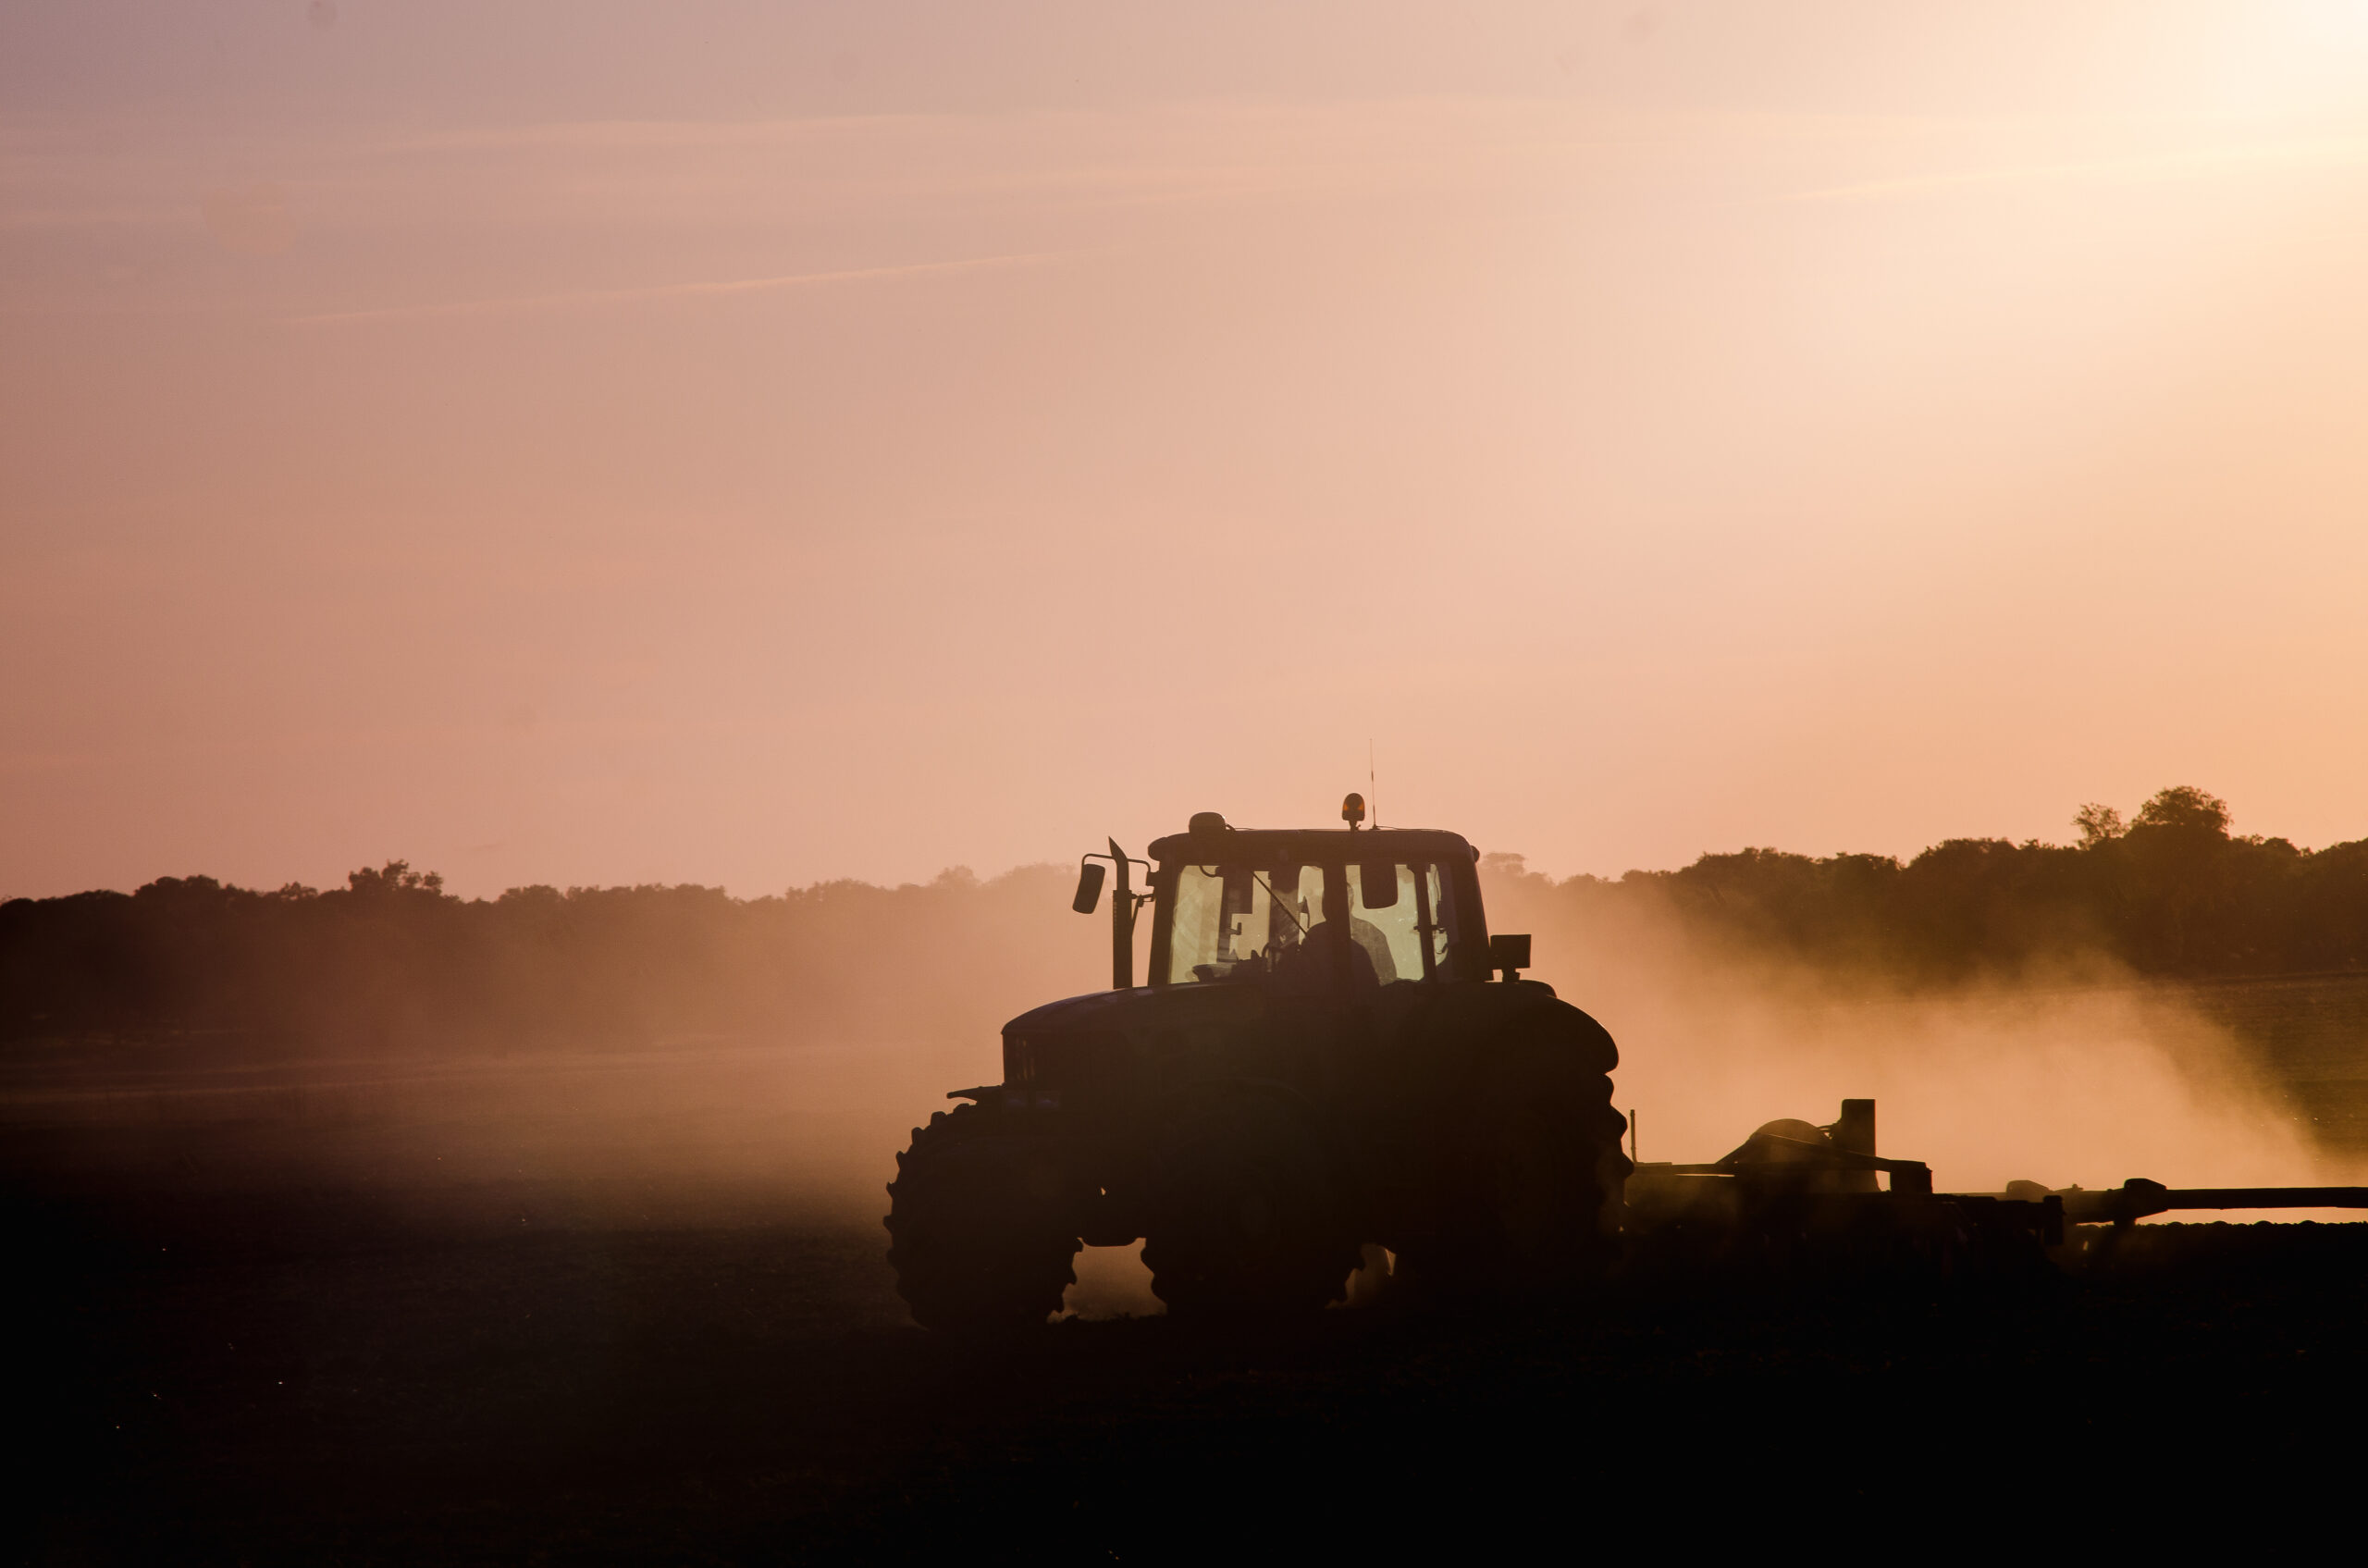 Silhouette of a tractor on a dusty field at sunrise